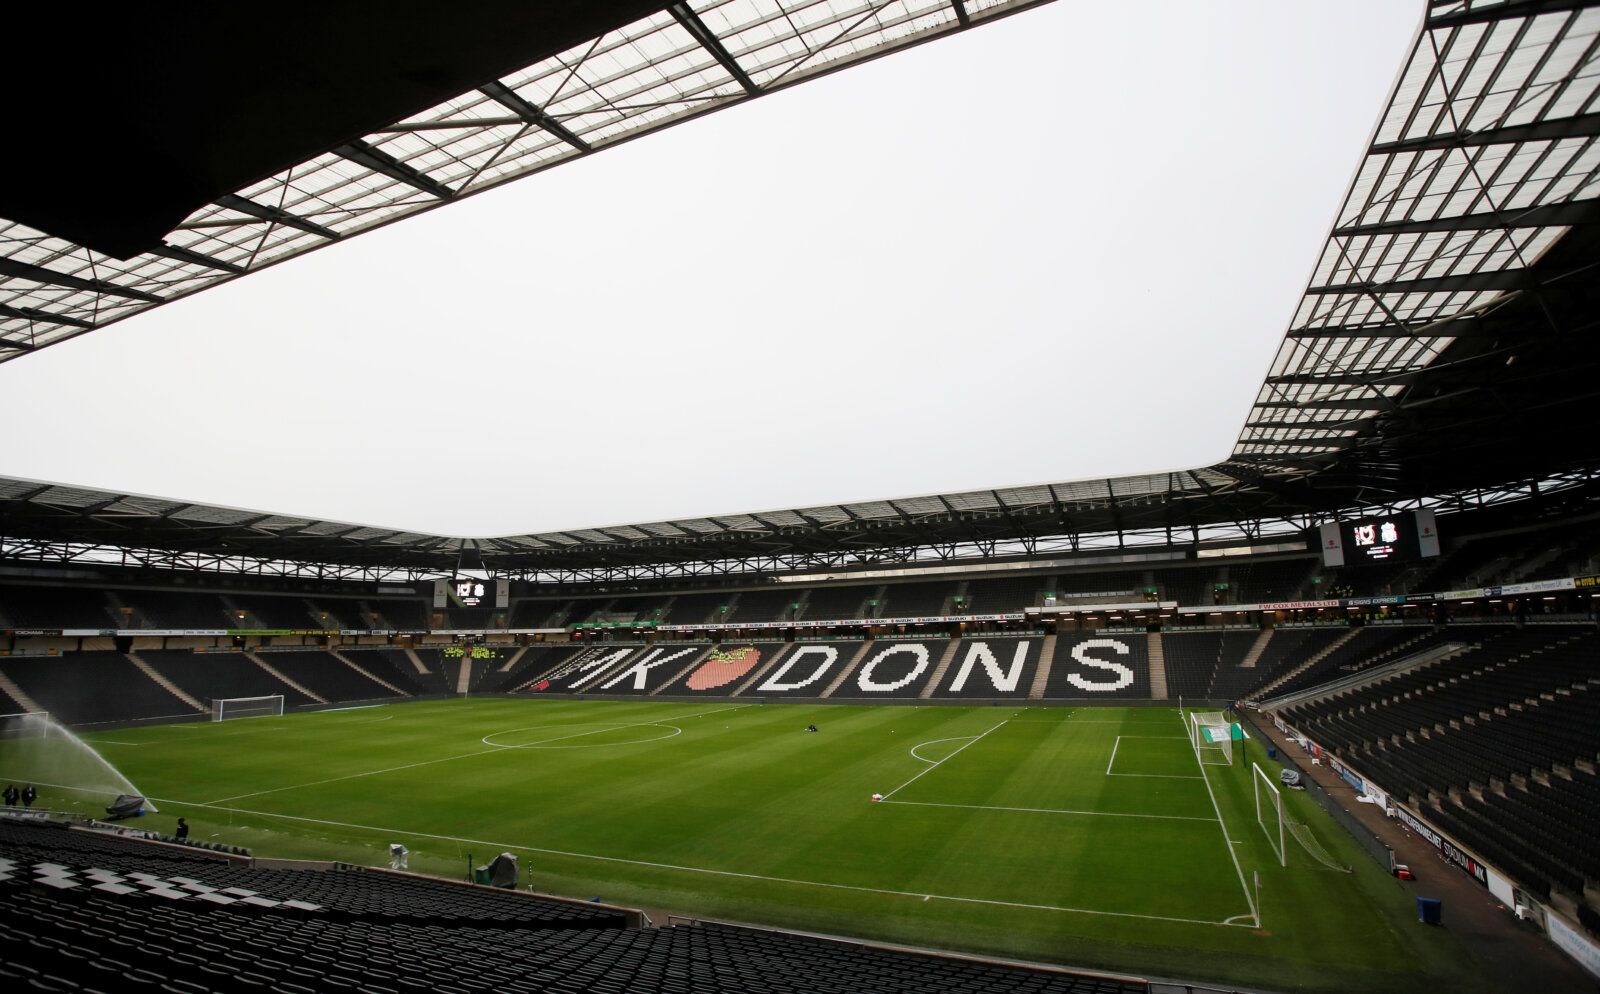 Soccer Football - Carabao Cup - Third Round - Milton Keynes Dons v Liverpool - Stadium MK, Milton Keynes, Britain - September 25, 2019  General view inside the stadium before the match  REUTERS/David Klein  EDITORIAL USE ONLY. No use with unauthorized audio, video, data, fixture lists, club/league logos or 